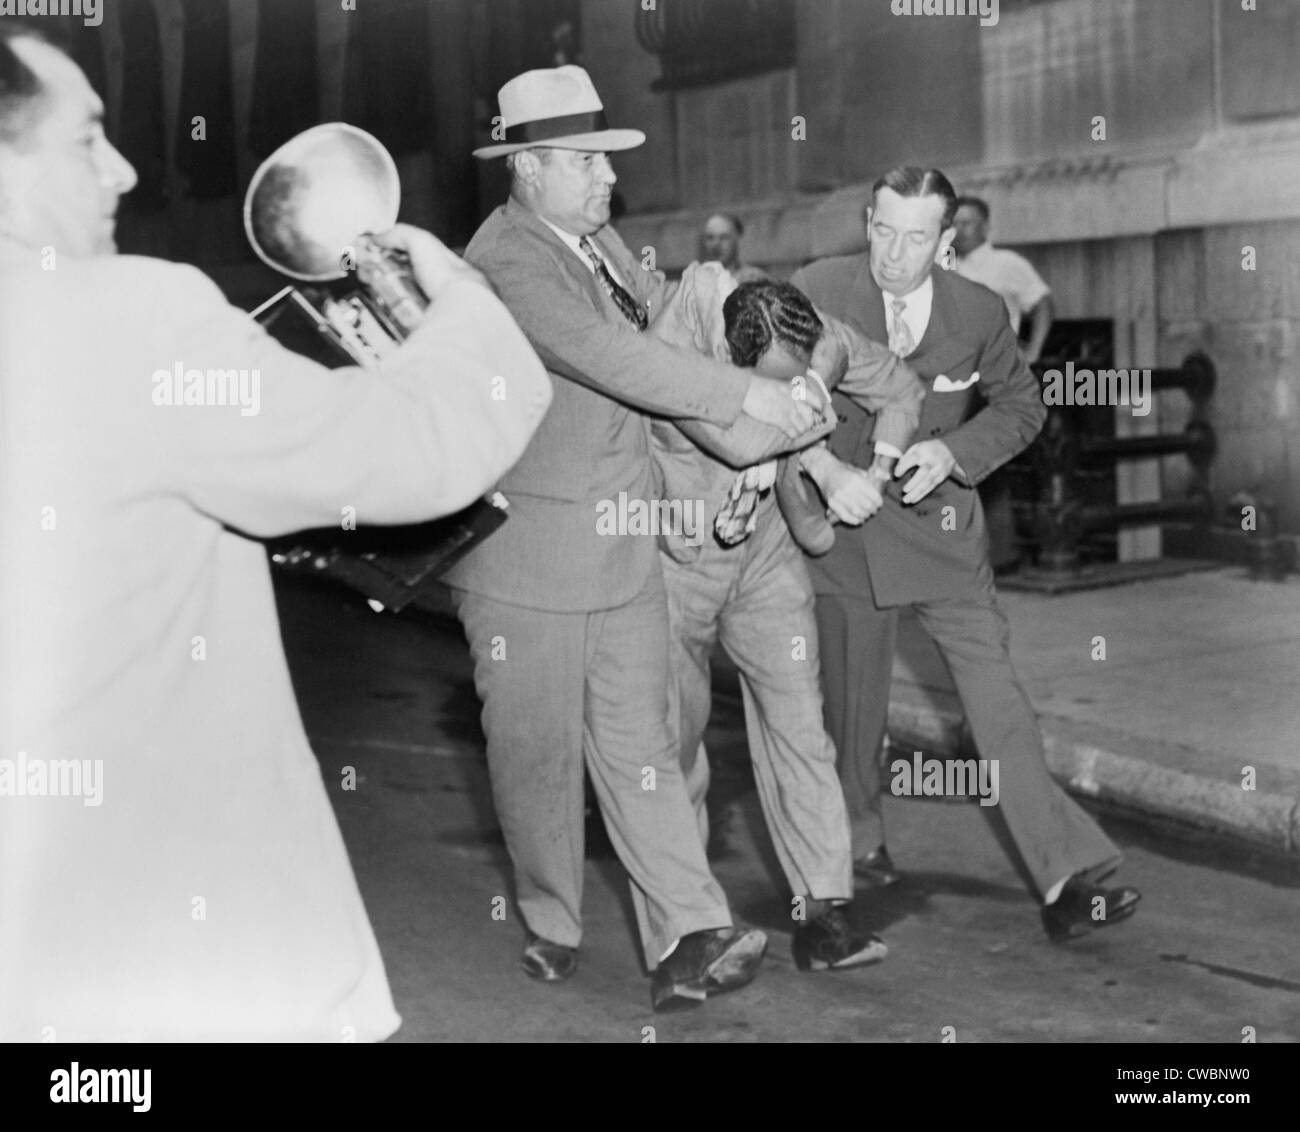 Two policemen forcibly escorting Vincent 'Jimmy Blue Eyes' Ado (1904-2001), after appearing in lineup; a news photographer Stock Photo